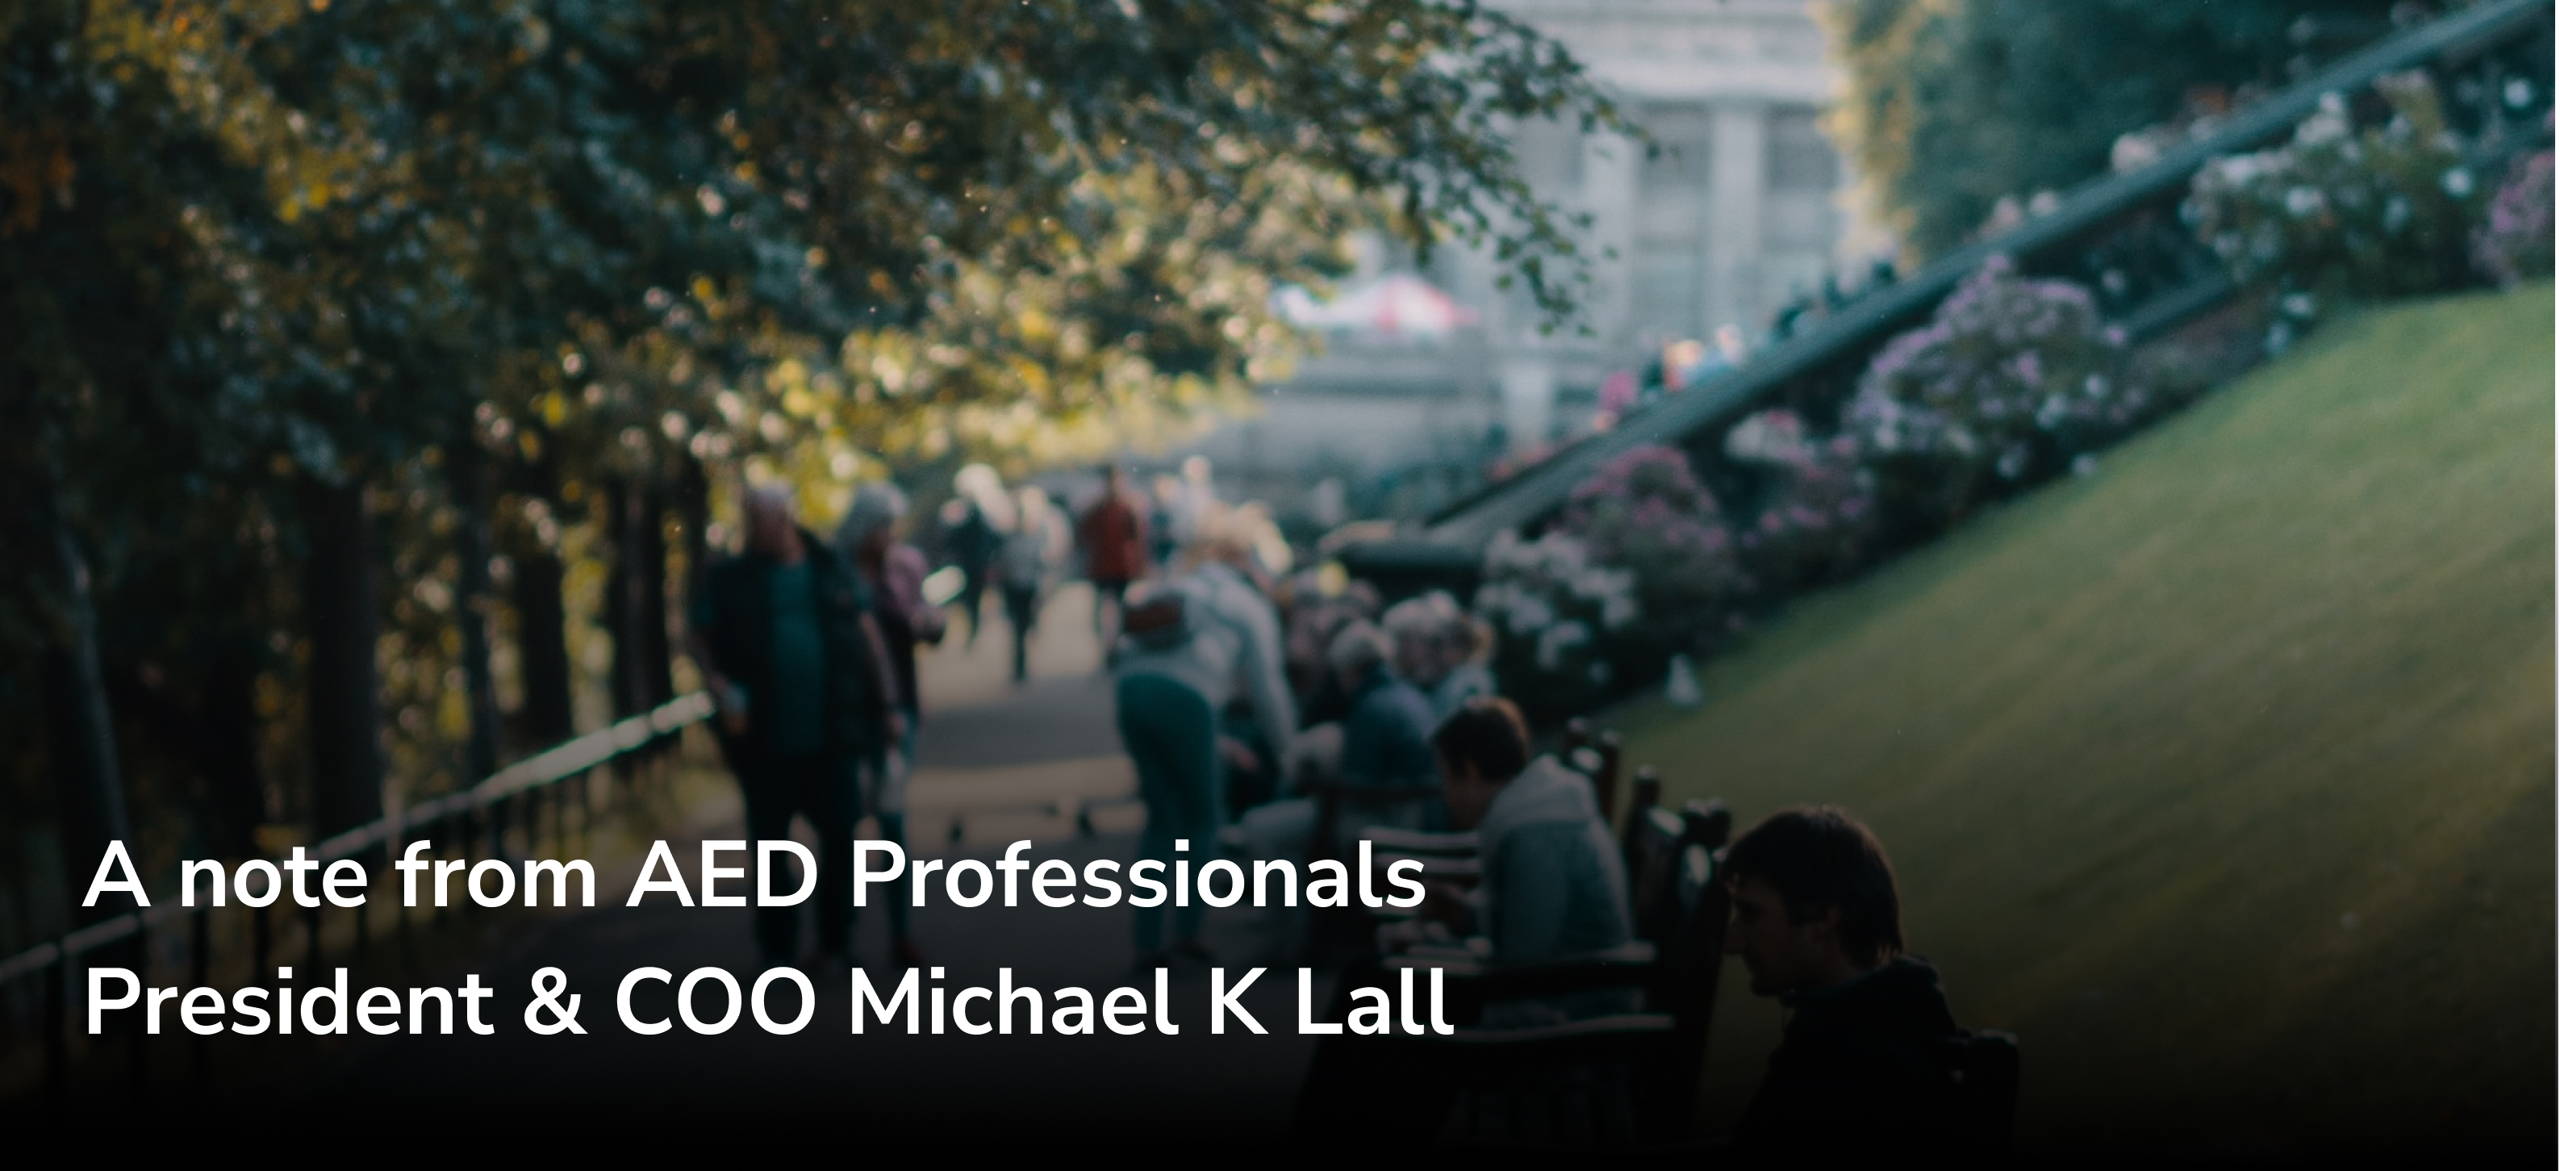 Image of people walking in a park with "A note from AED Professionals President & COO Michael K Lall"